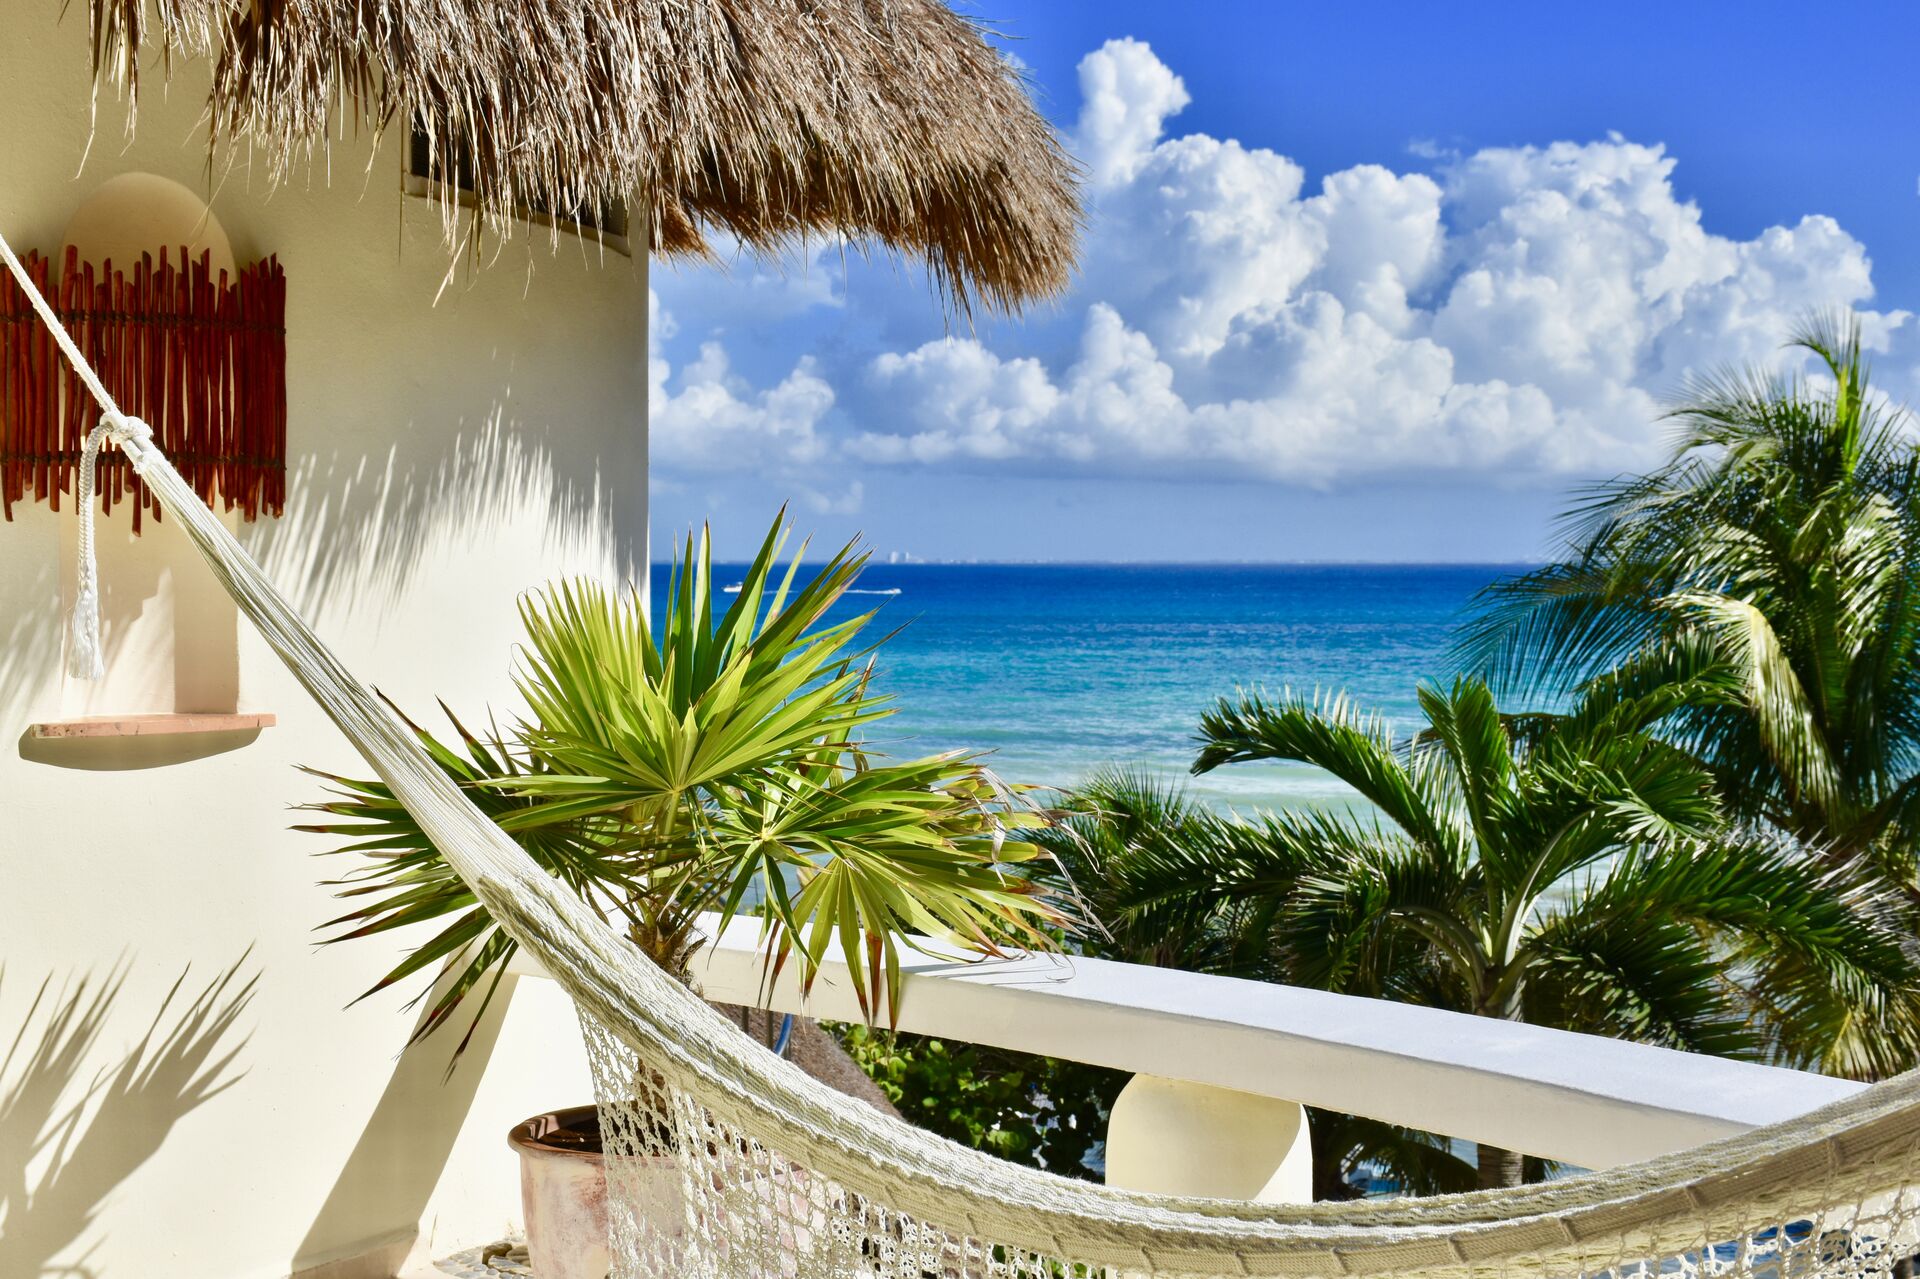 Your balcony view.